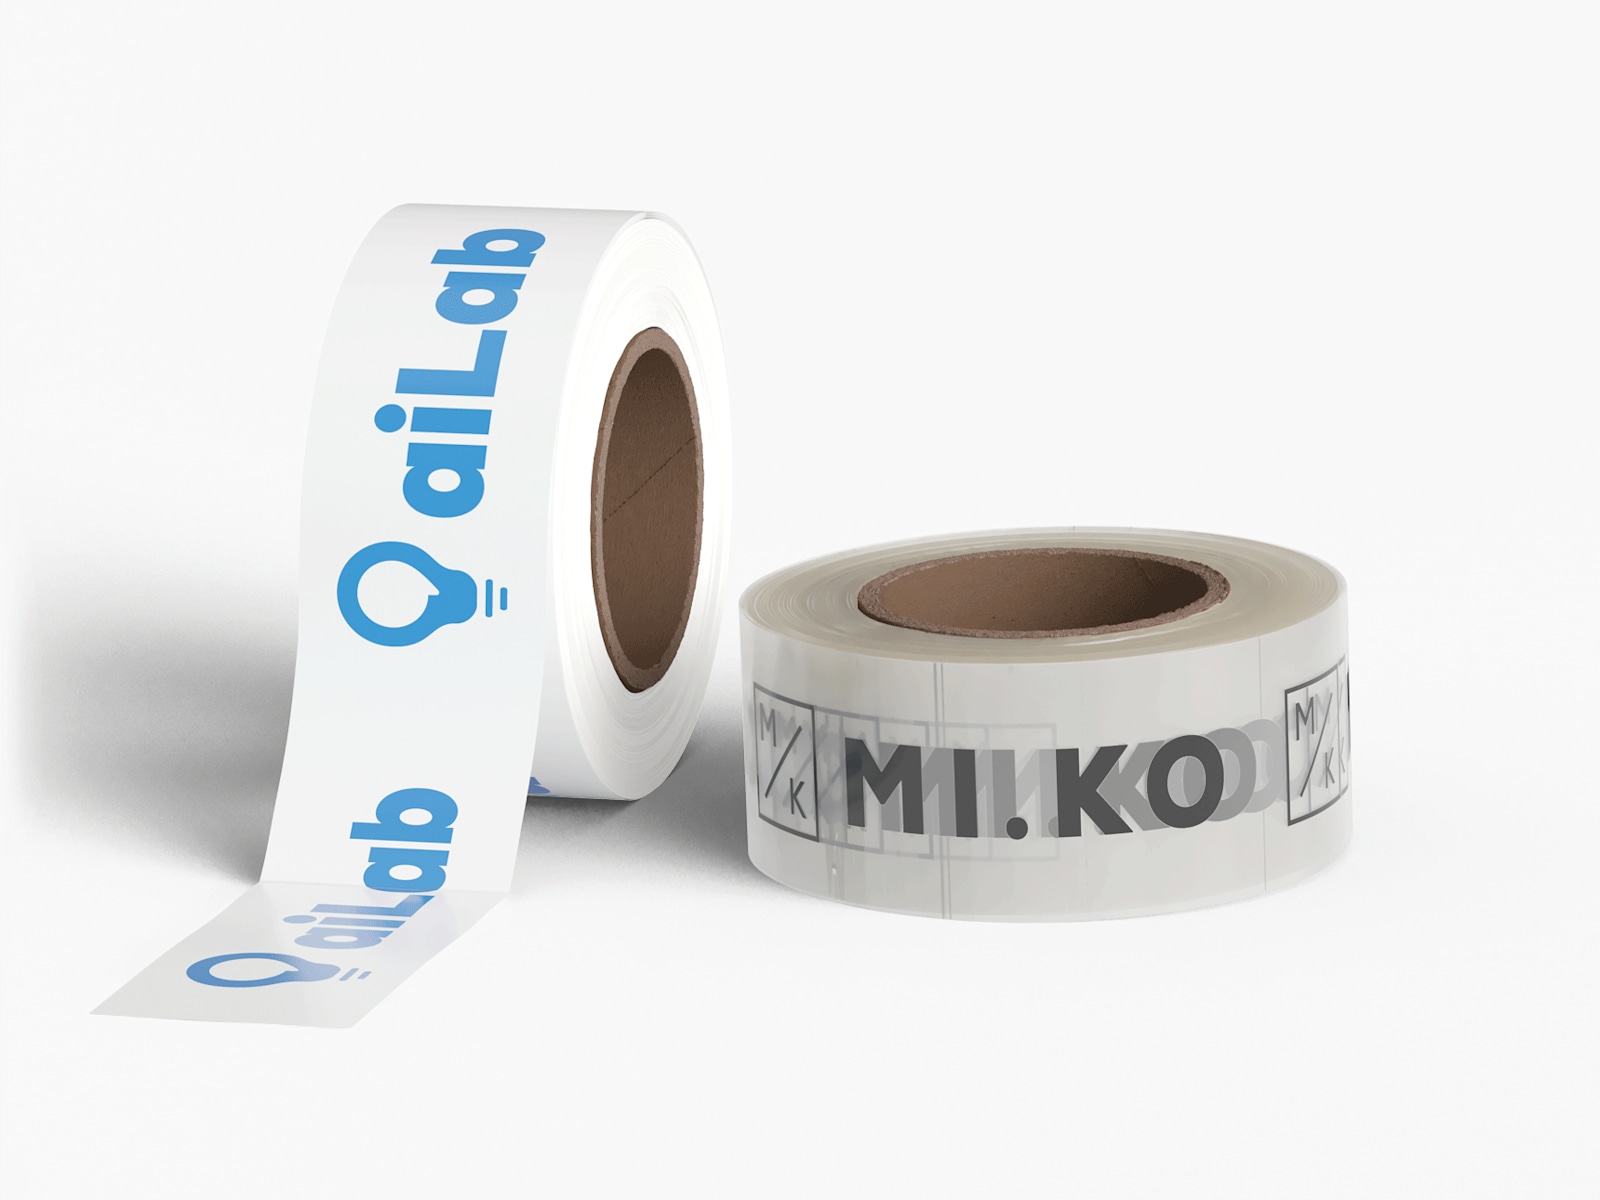 A roll white plastic, and a roll of clear plastic Self-Adhesive Packaging Tape on a gray background. They are both custom printed with repeating logo designs.